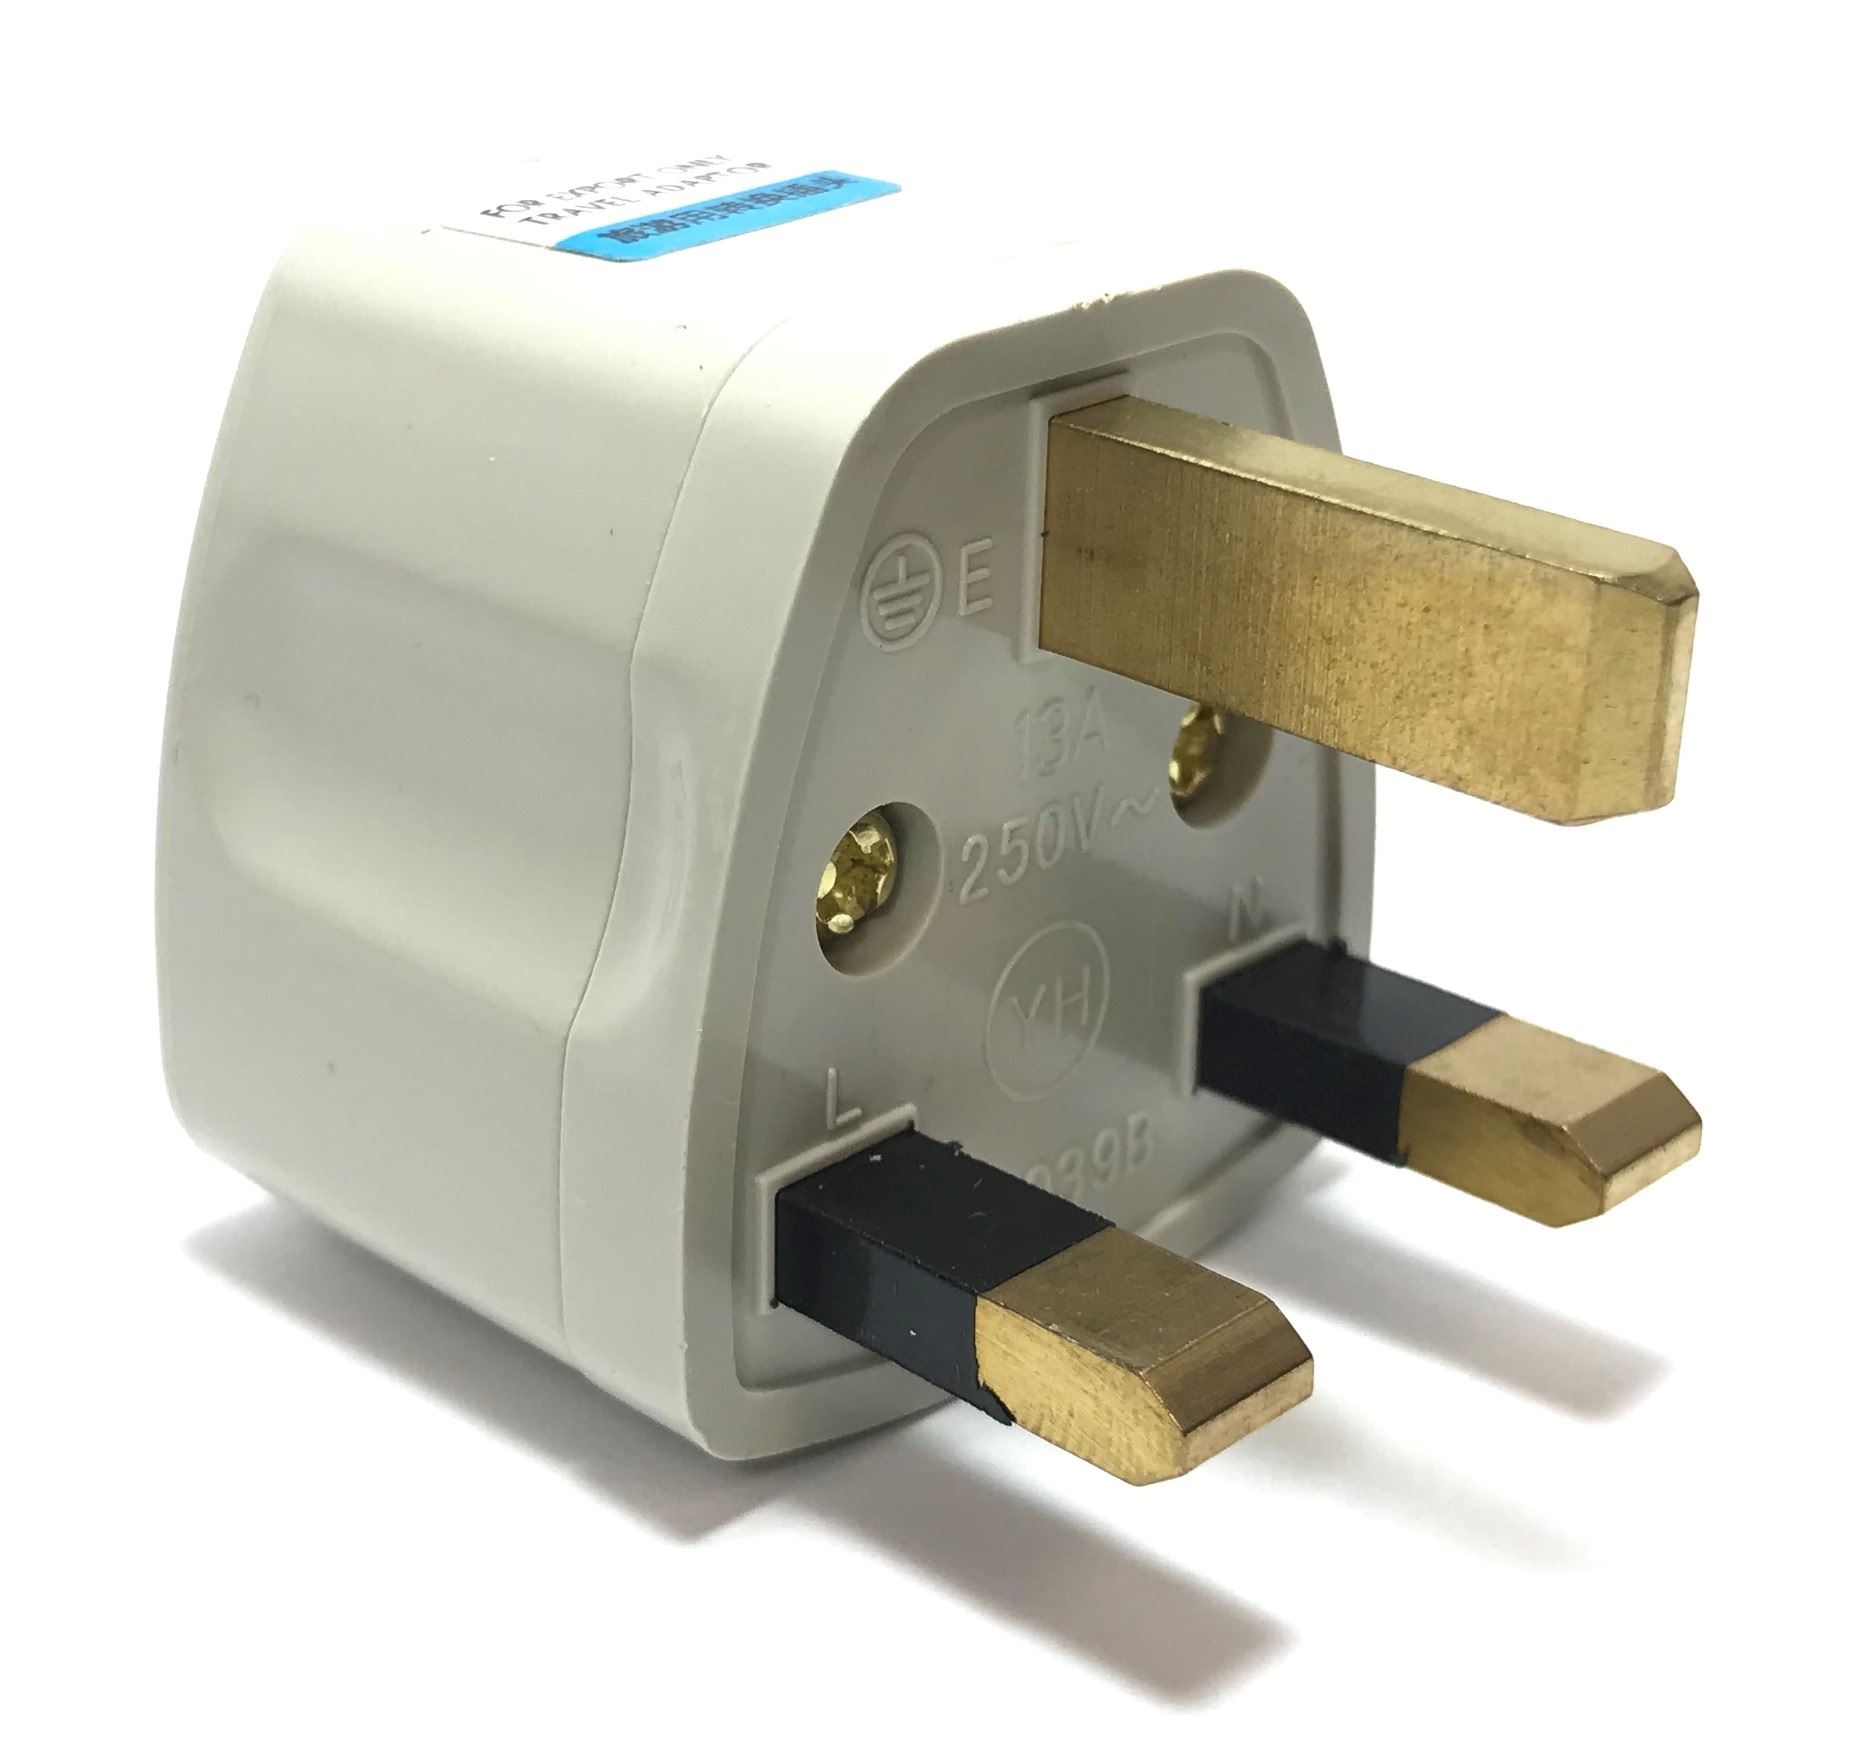 uk power adapter to us